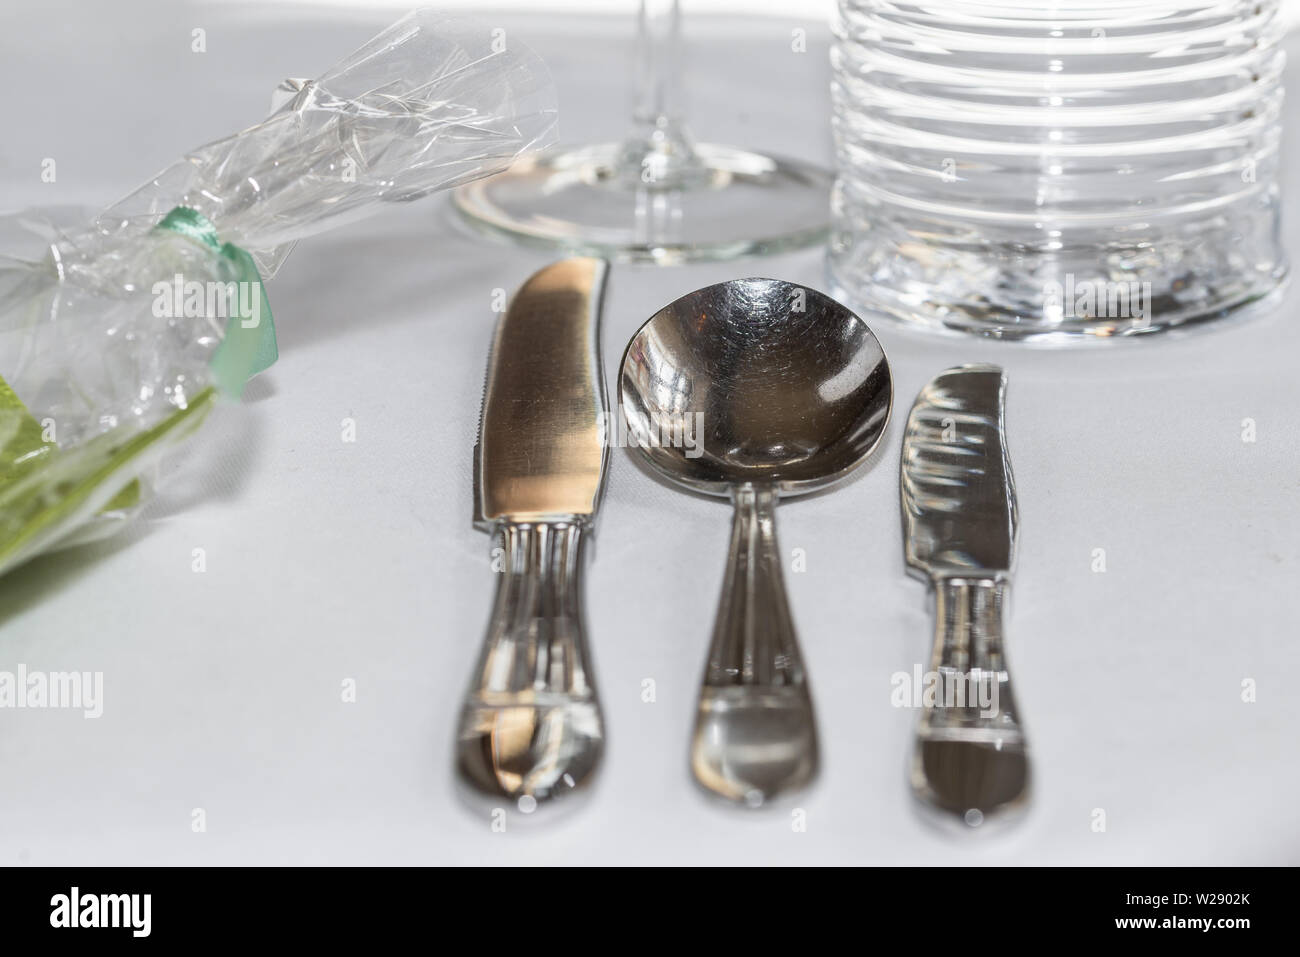 Table decoration of a wedding with glasses cutlery and decoration, Germany Stock Photo